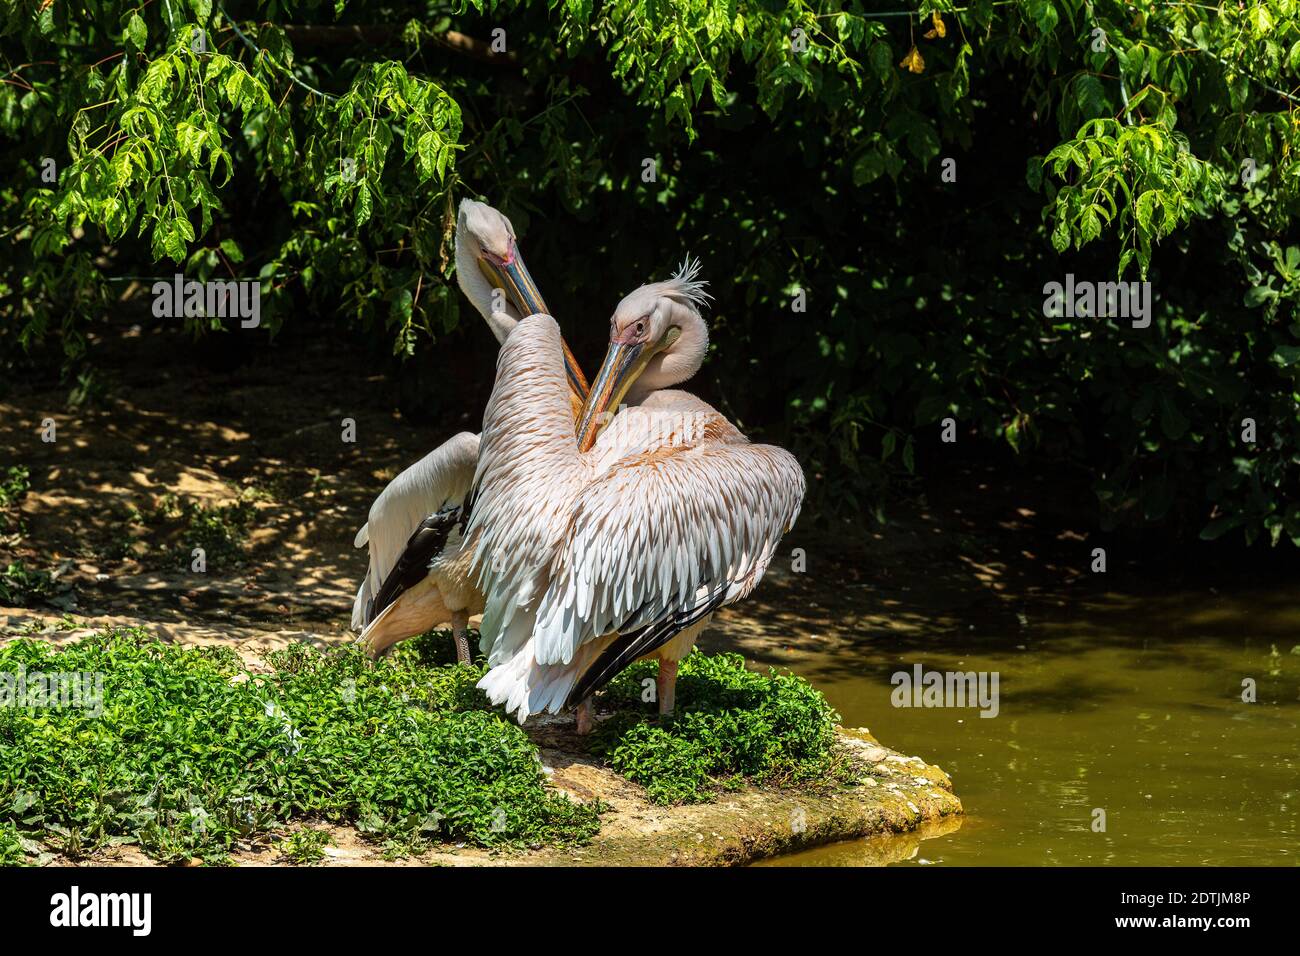 White Pelicans intent on cleaning the plumage. Lyon, France, Europe Stock Photo